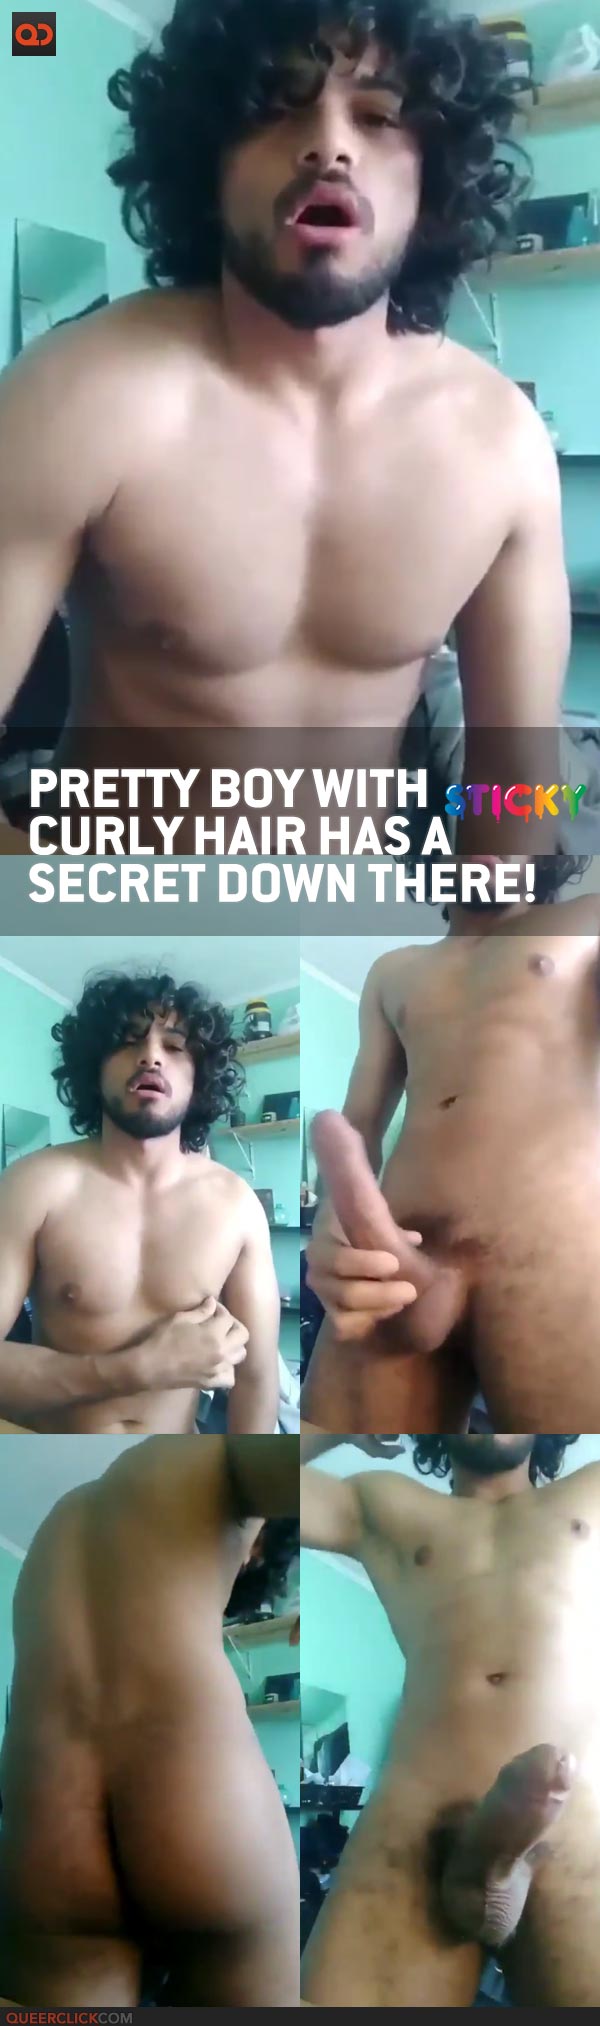 Pretty Boy With A Curly Hair Has A Secret Down There!